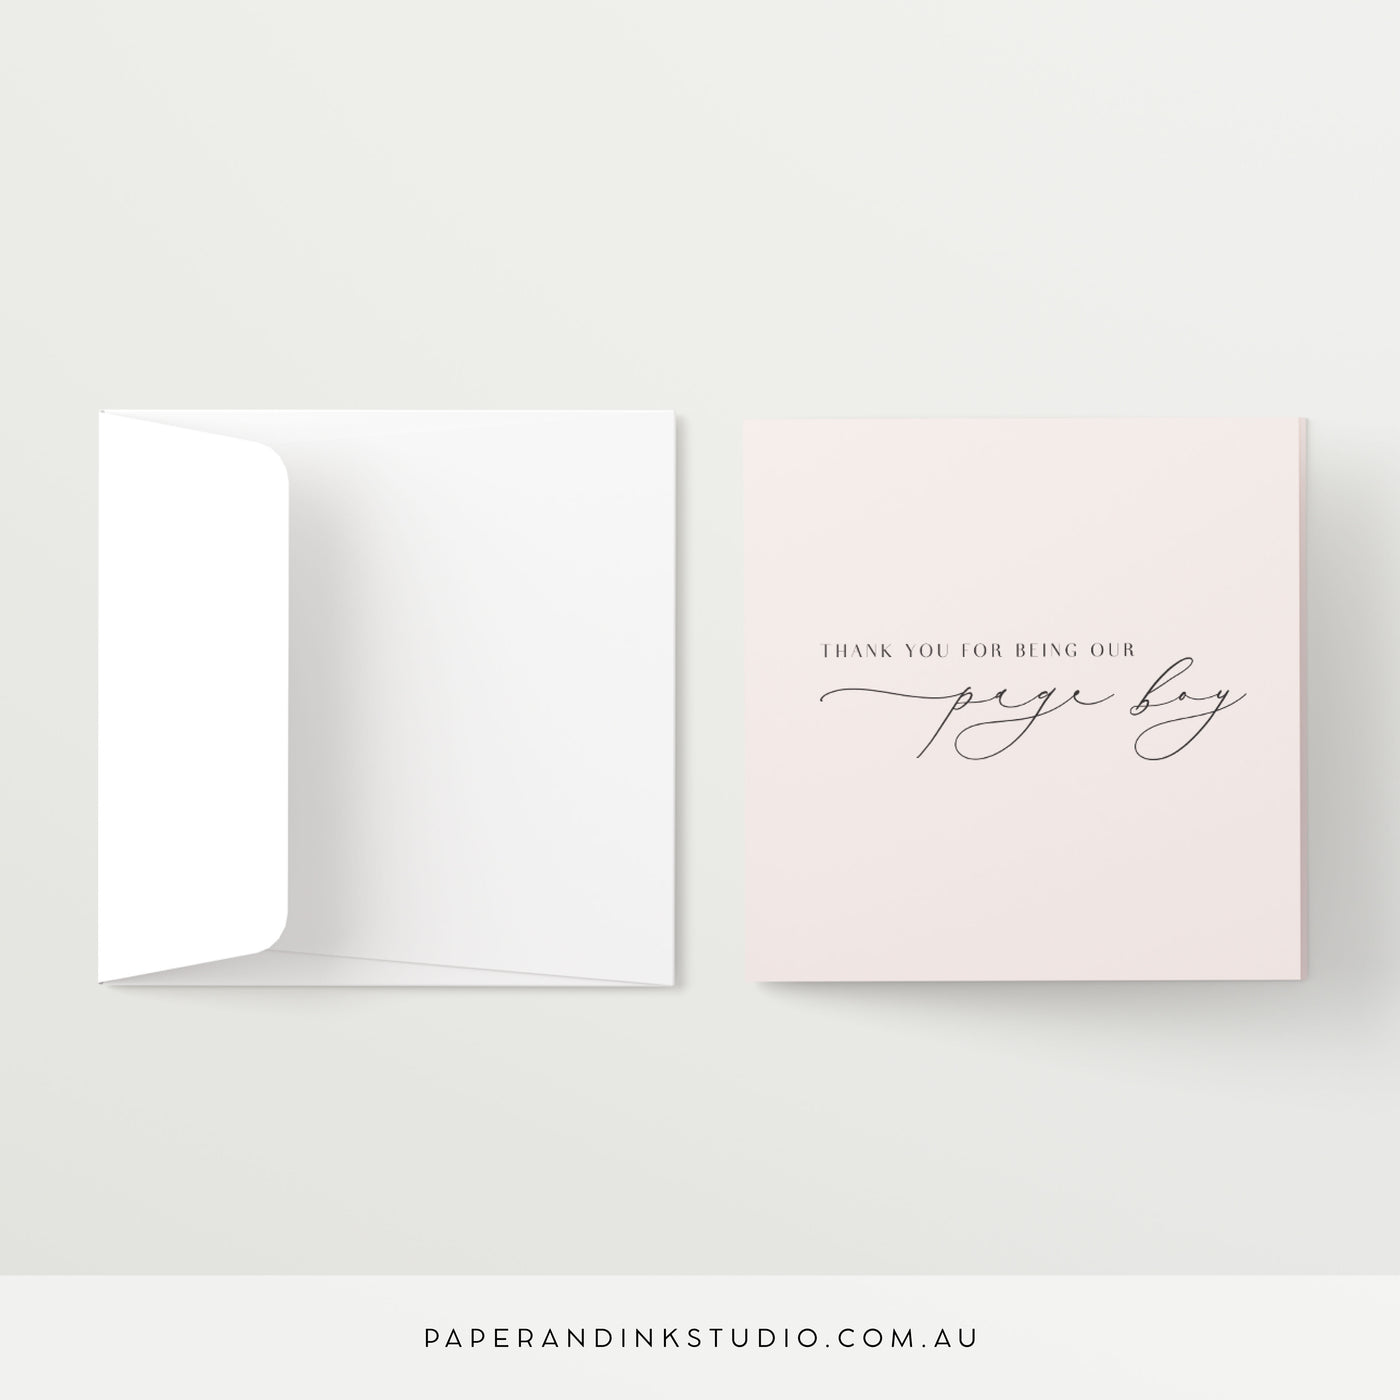 Thank You For Being Our Page Boy Card - Silk